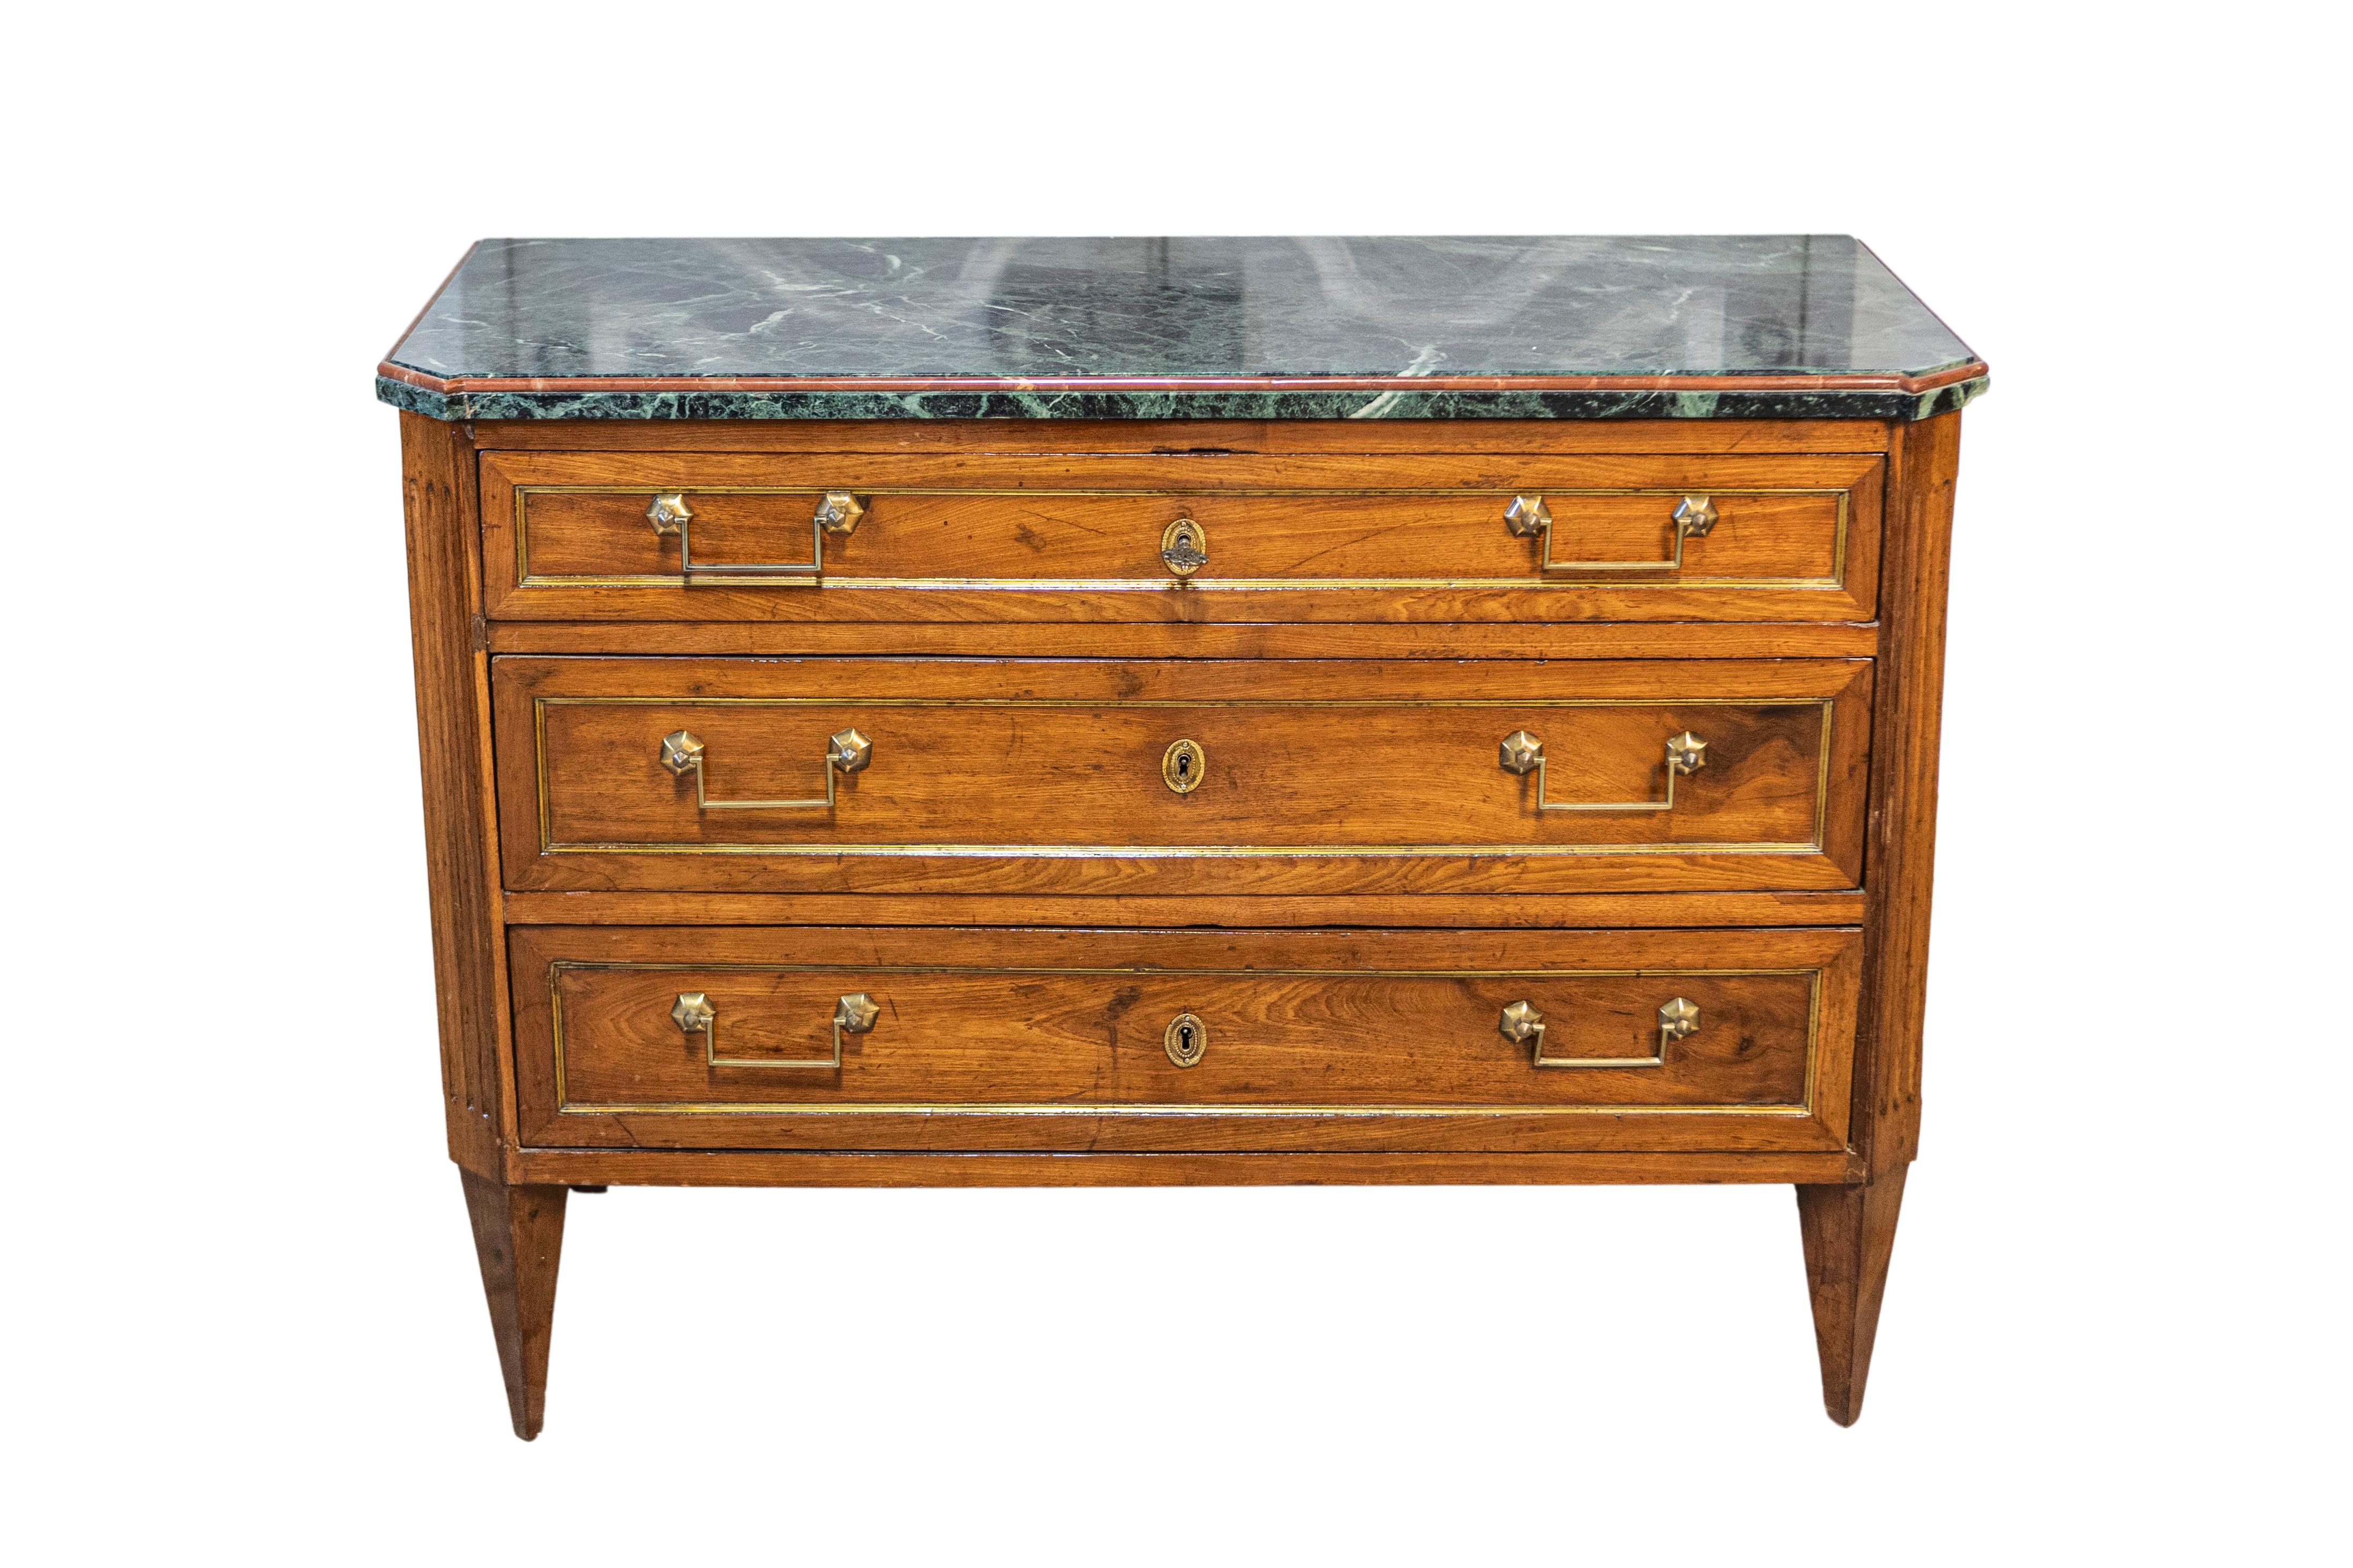 An Italian Neoclassical style Piemontese walnut commode from circa 1890 with three drawers and dark green marble top. This Italian Neoclassical style Piemontese walnut commode, dating back to circa 1890, is a testament to timeless elegance and